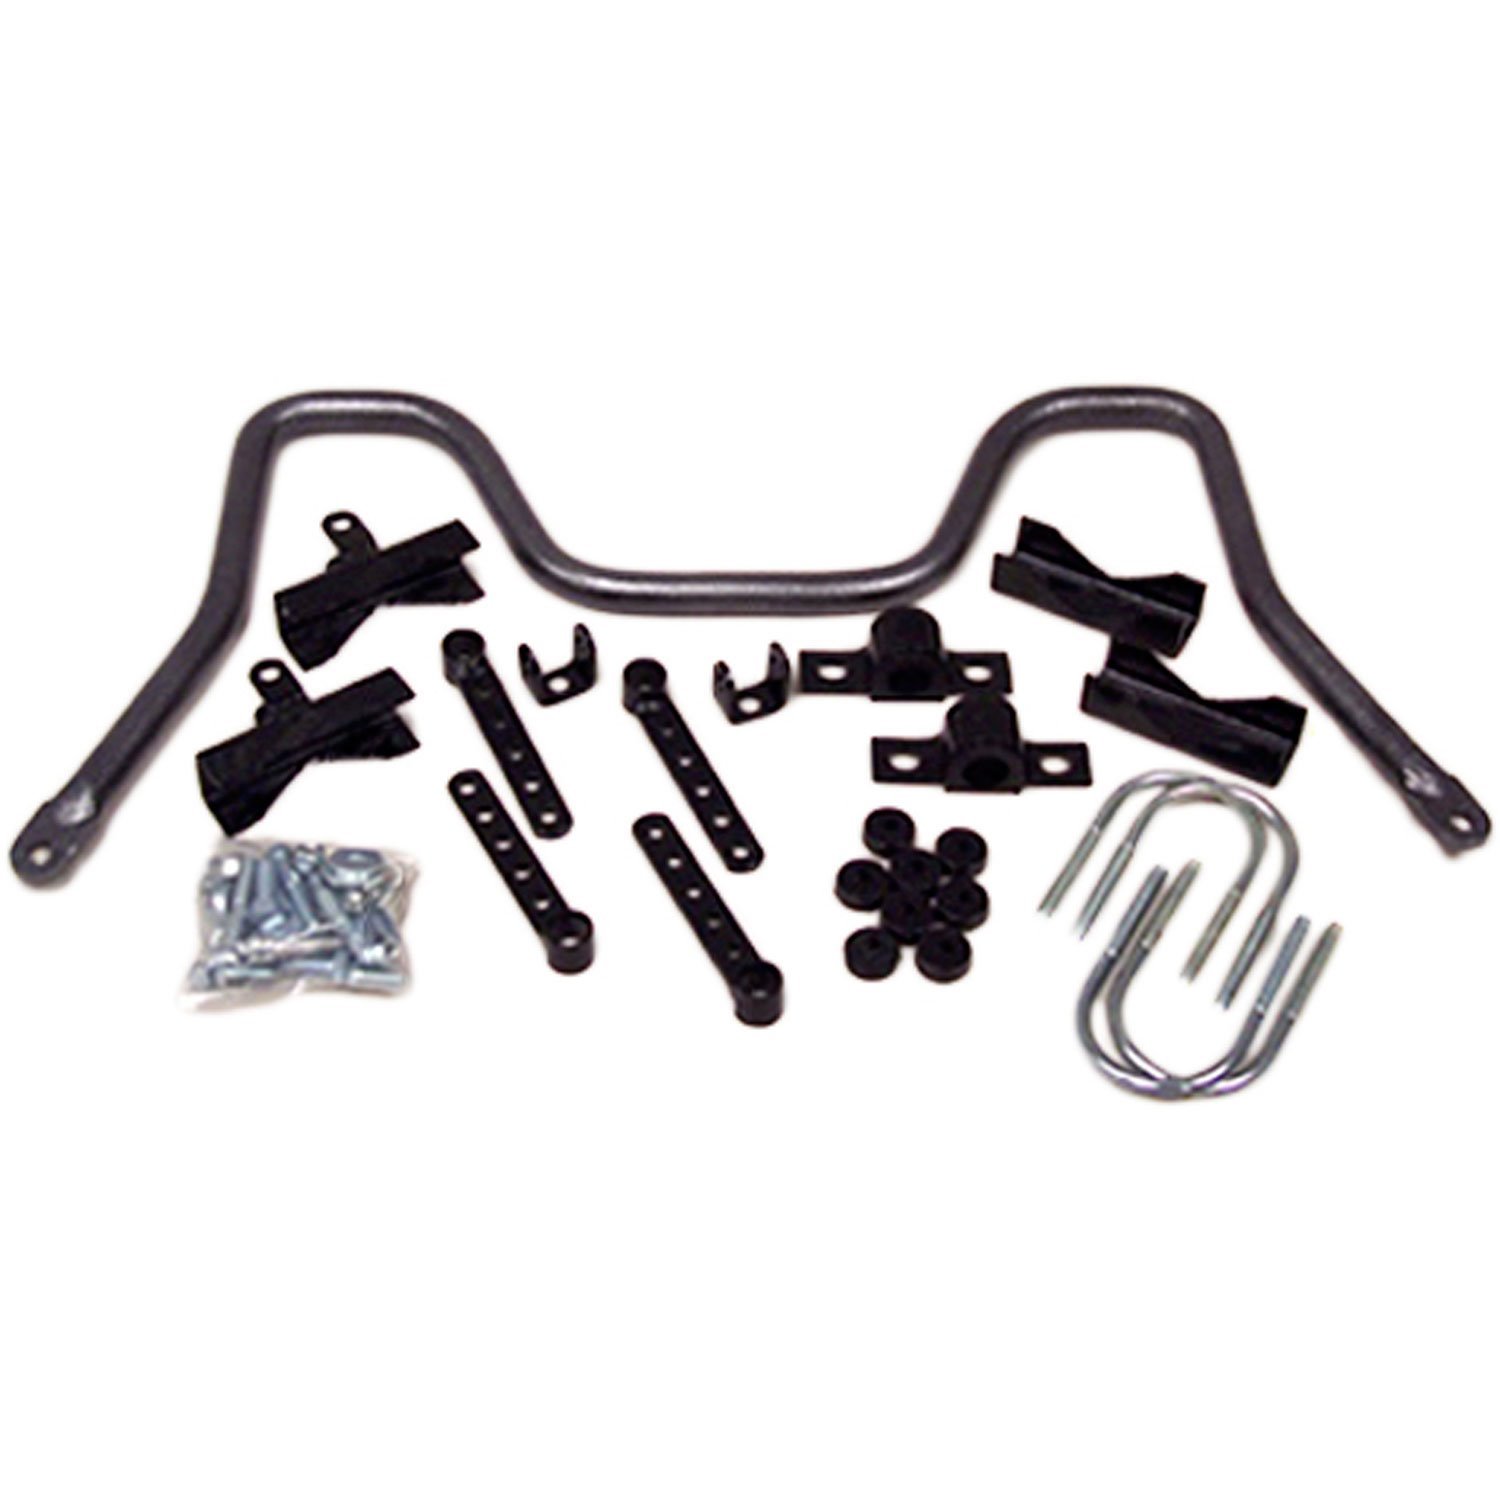 Rear Sway Bar for 2001-2006 Chevy/GMC 1500HD 2WD